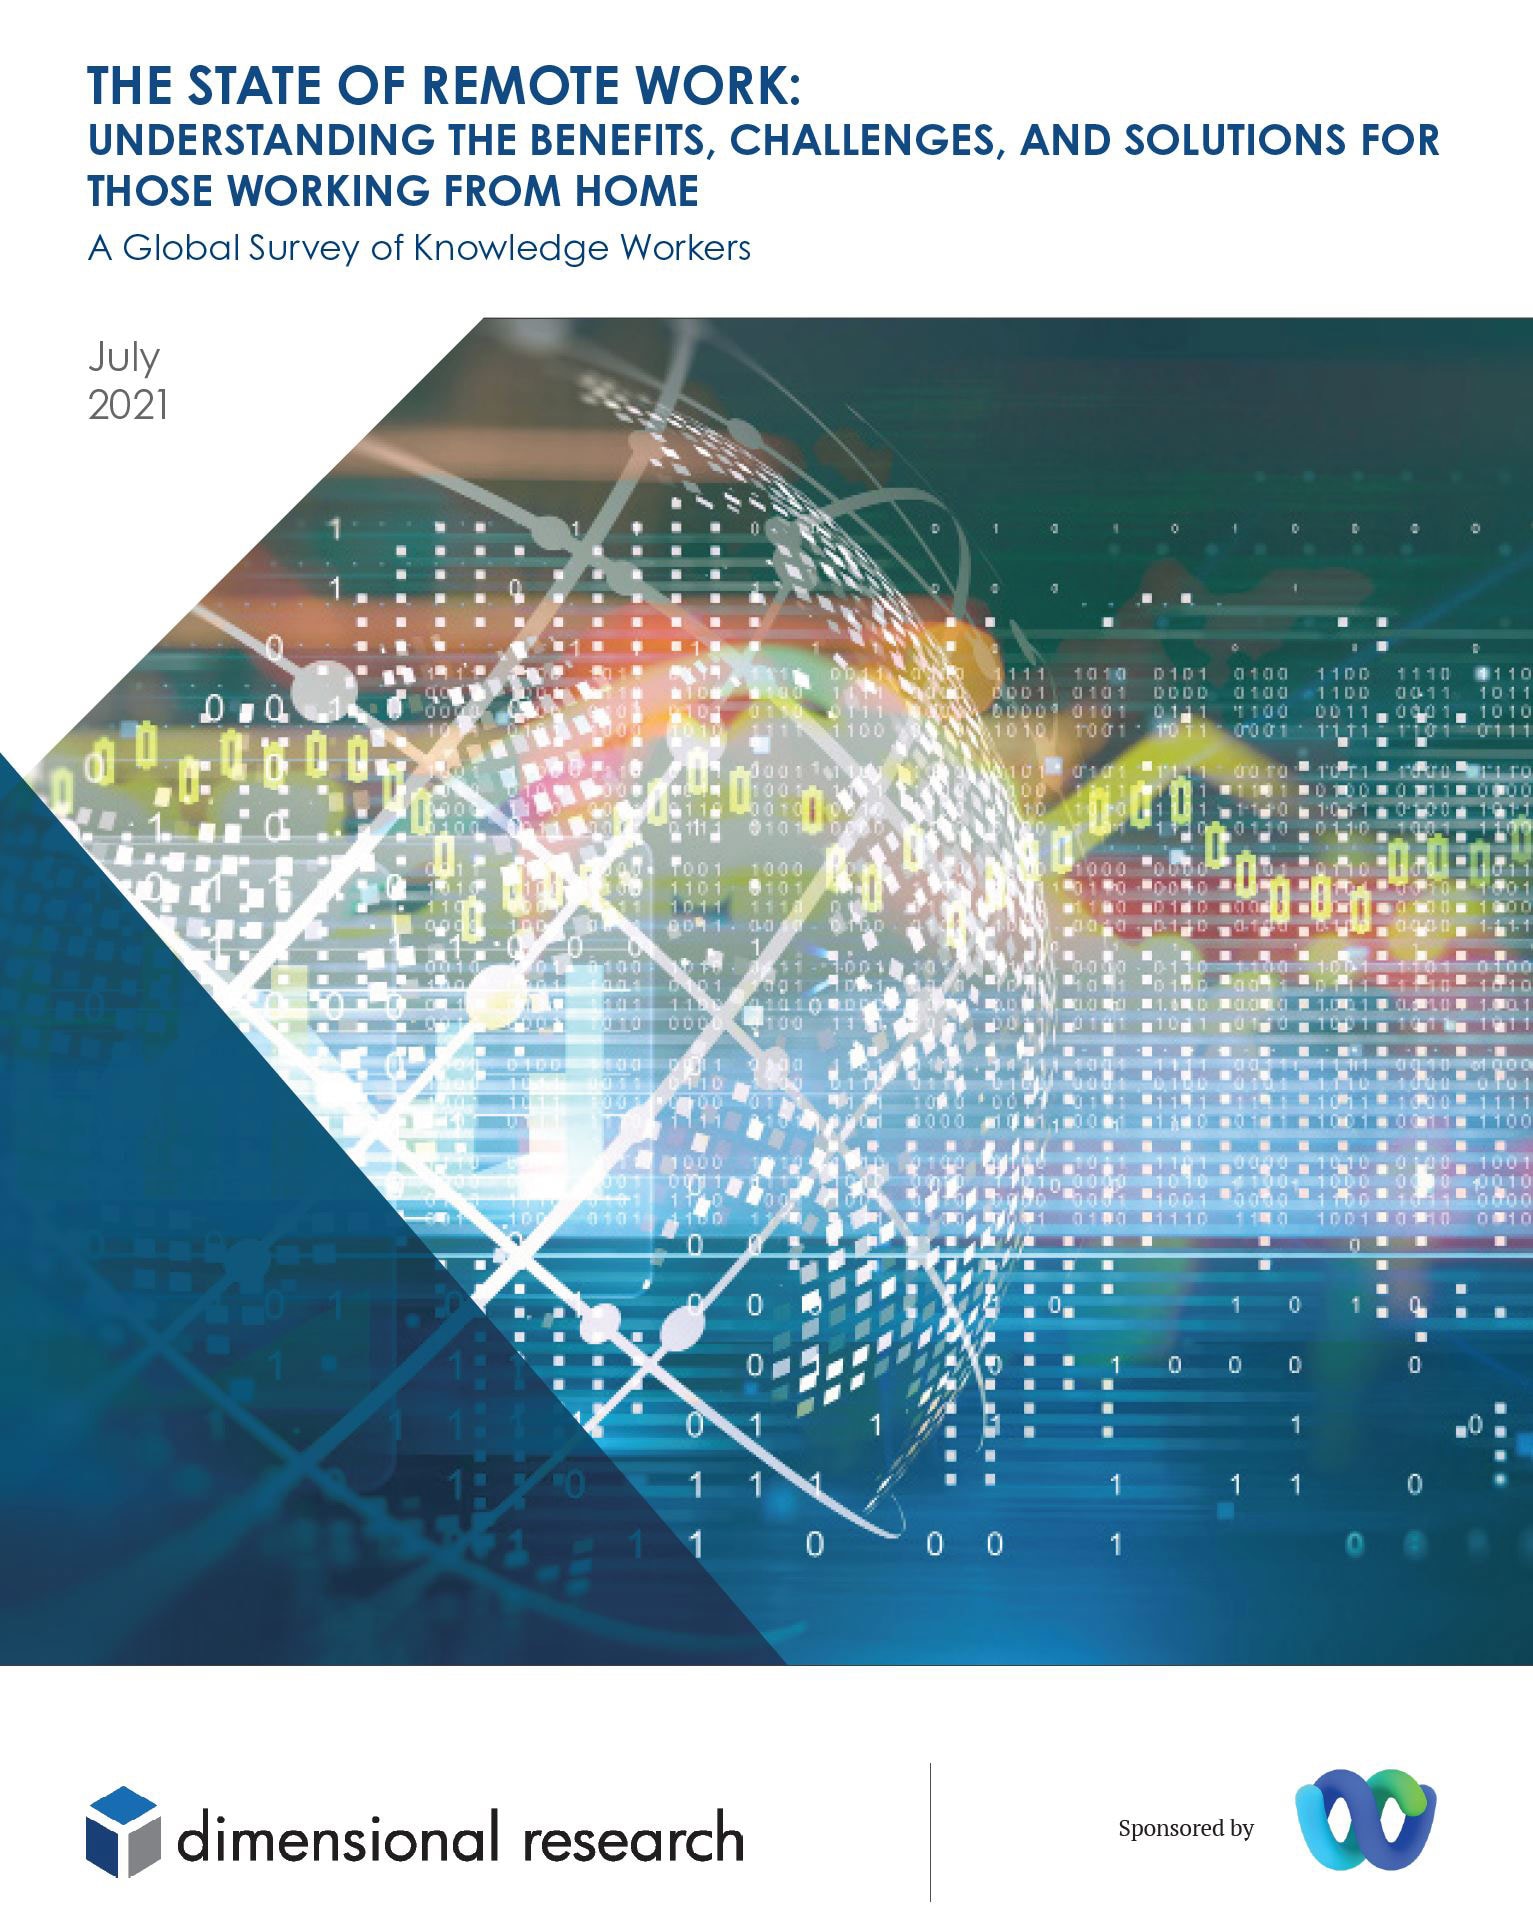 Cover Image: A Global Survey of Knowledge Workers